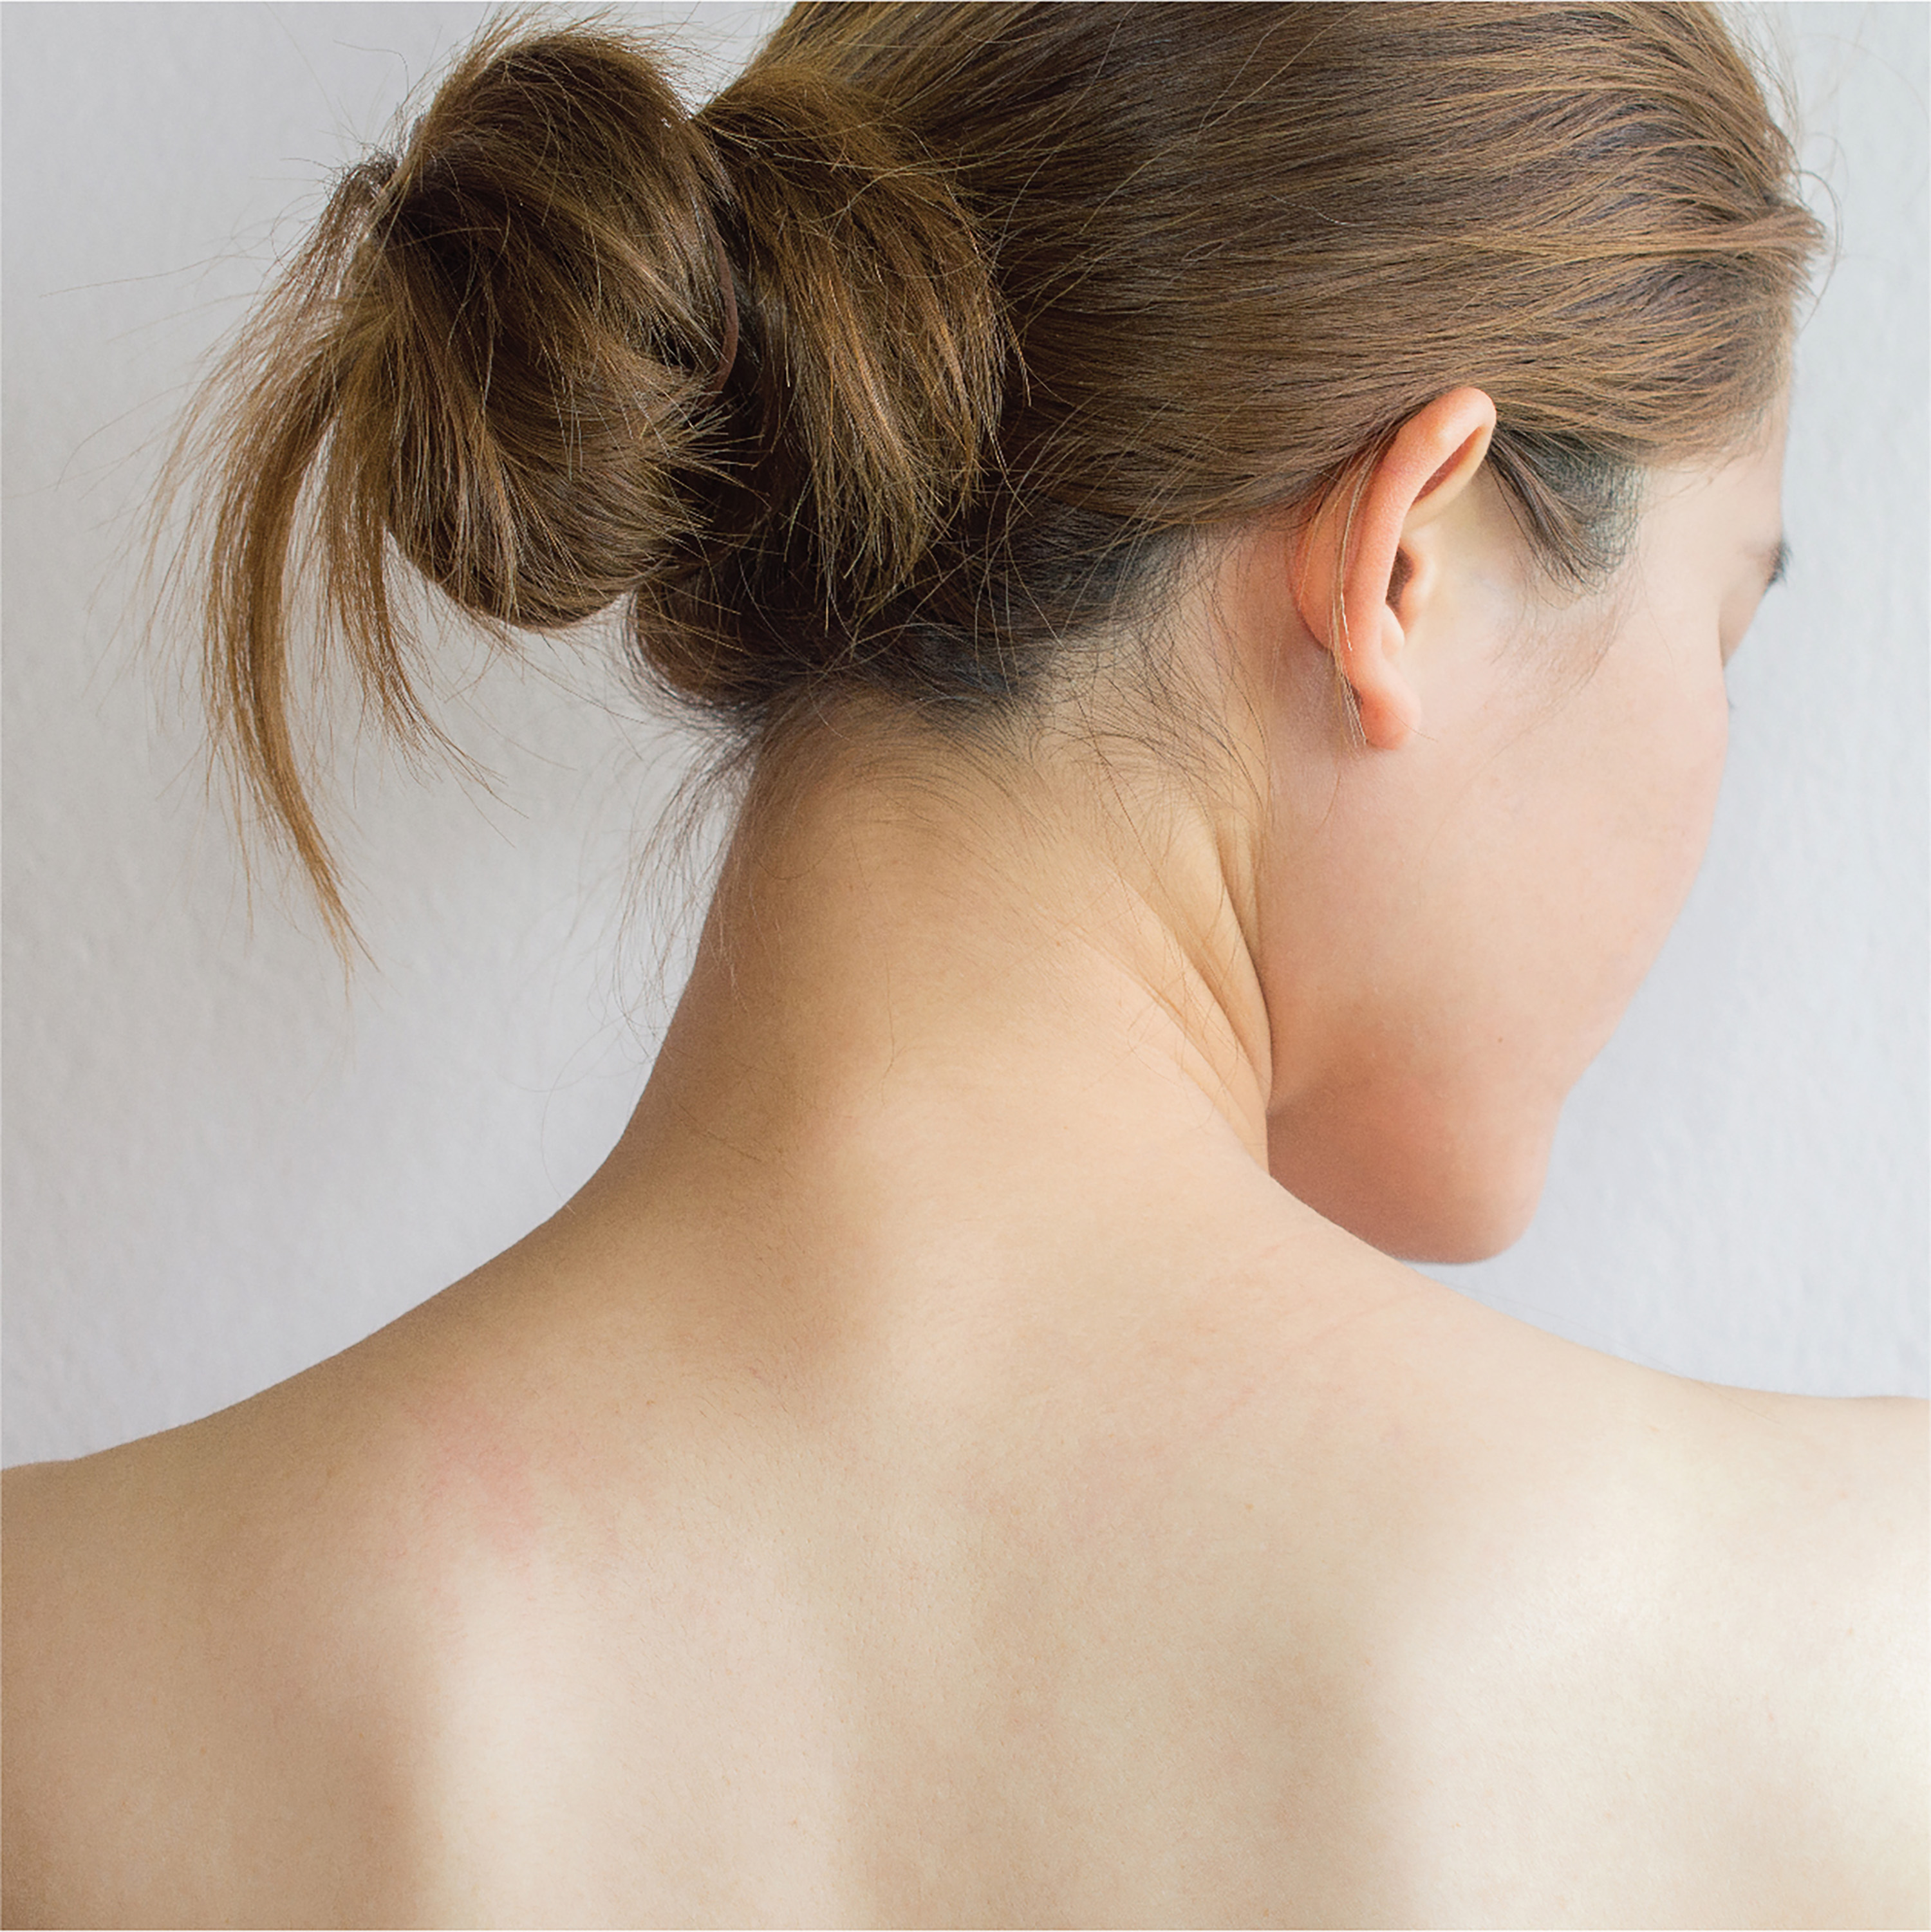 How to Banish Back and Chest Acne - Treatments for Body Acne